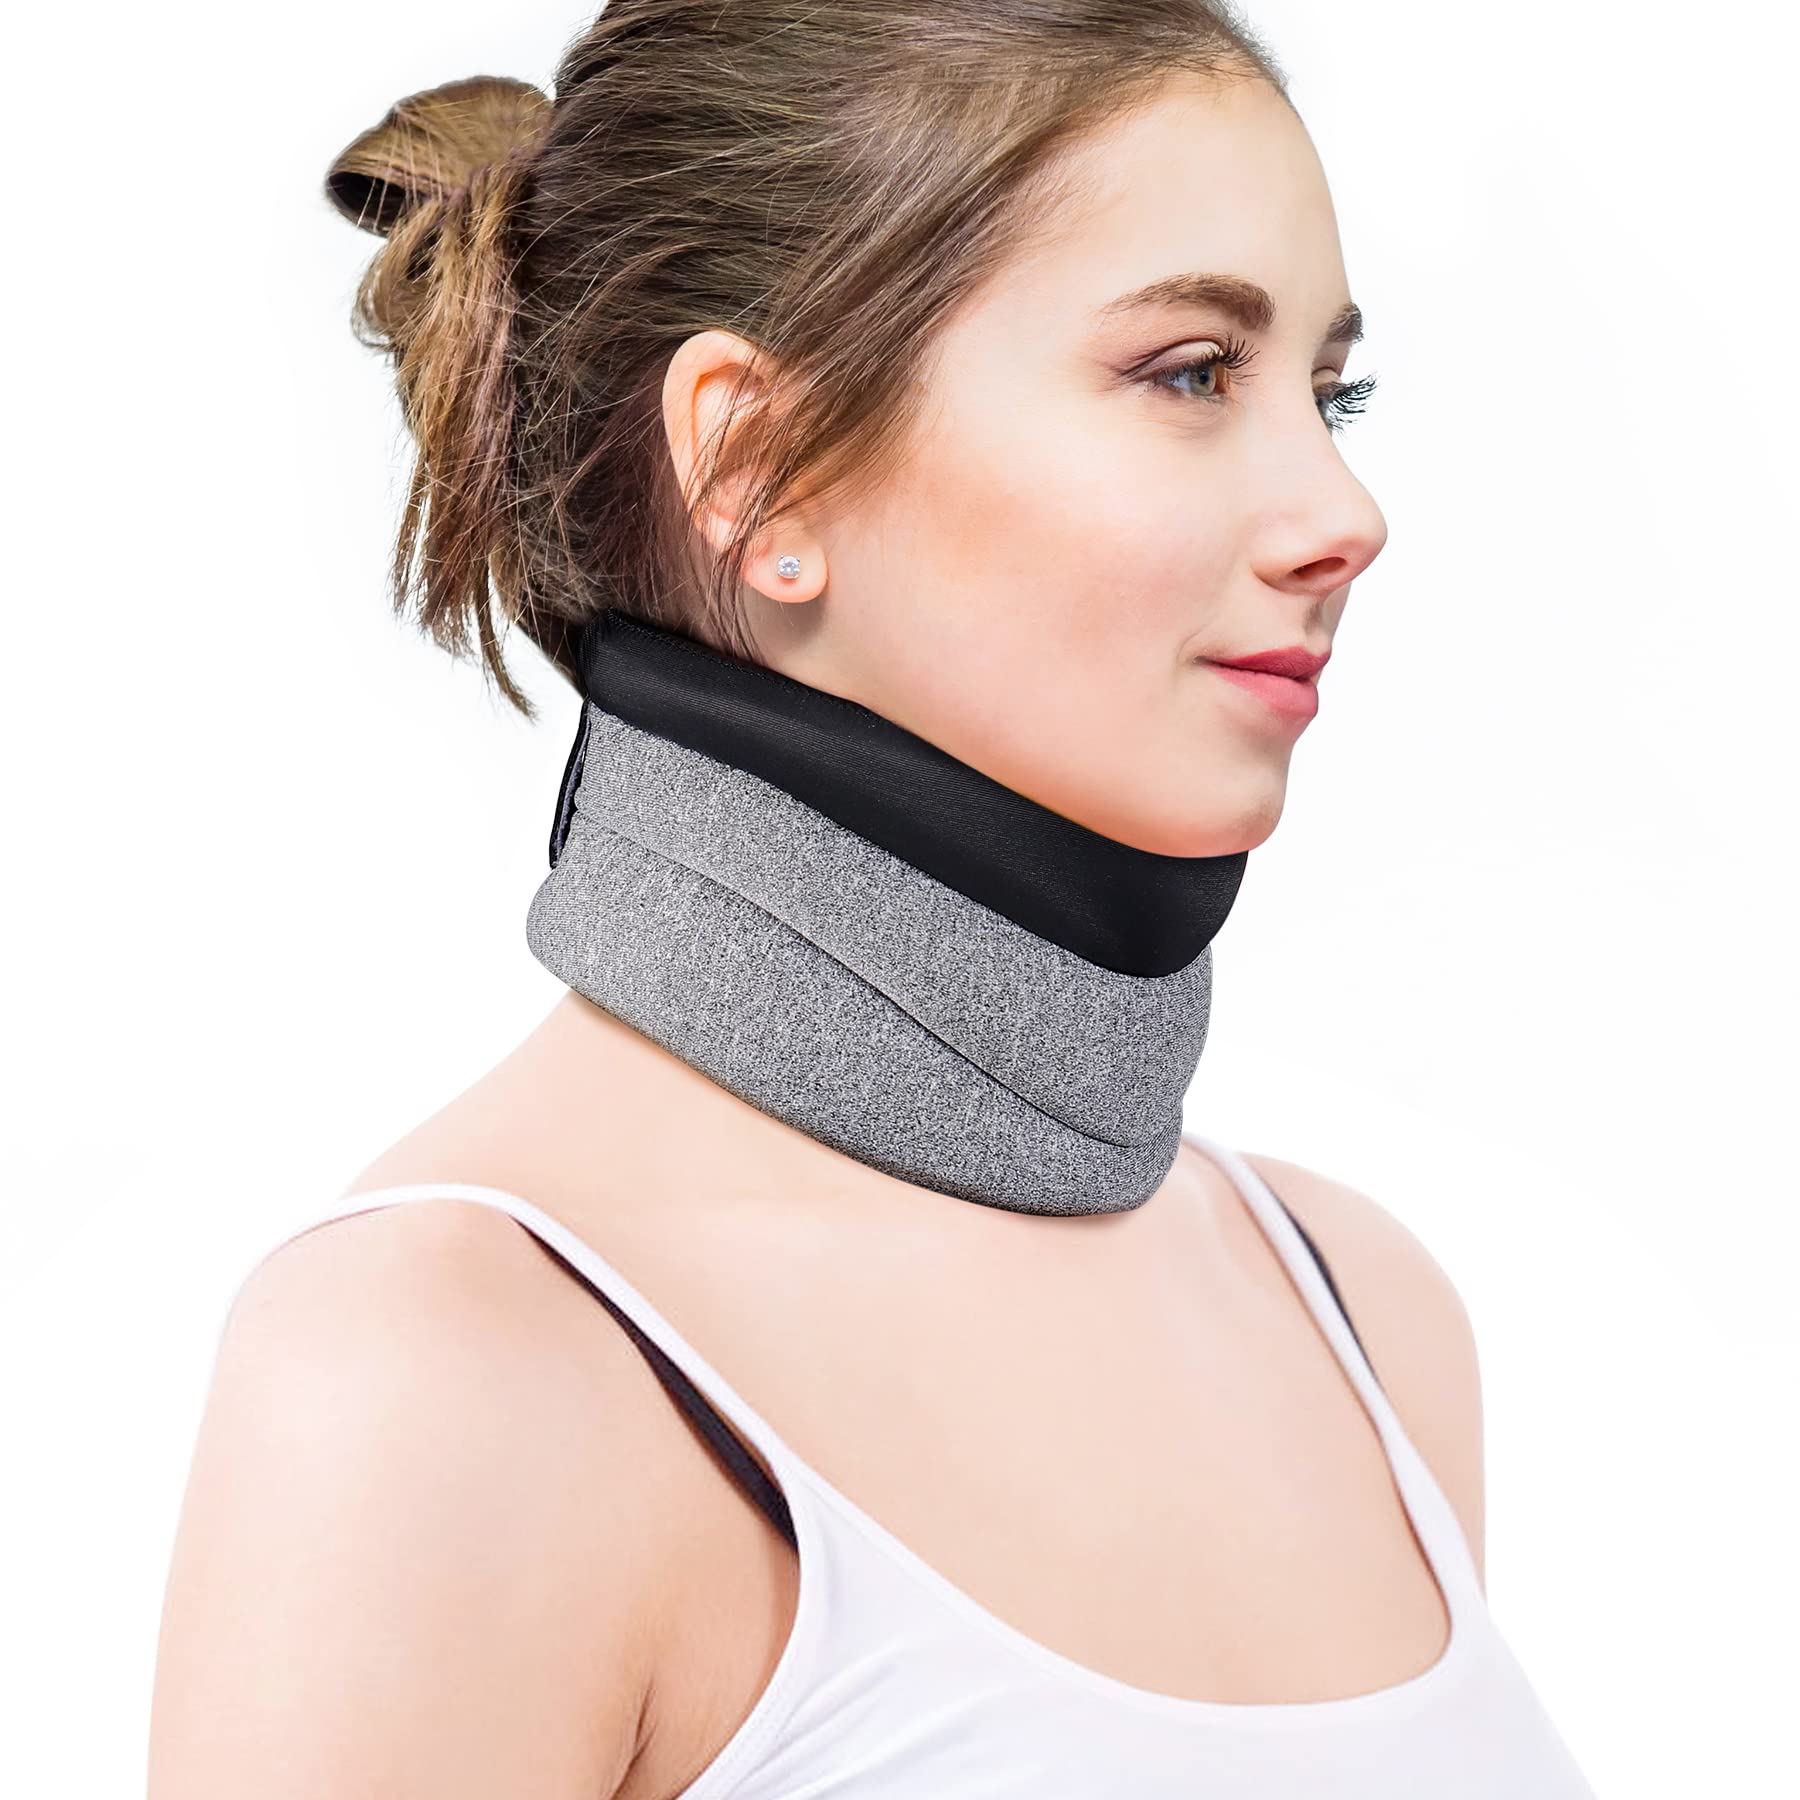 Soft Cervical Collar - What You Need to Know